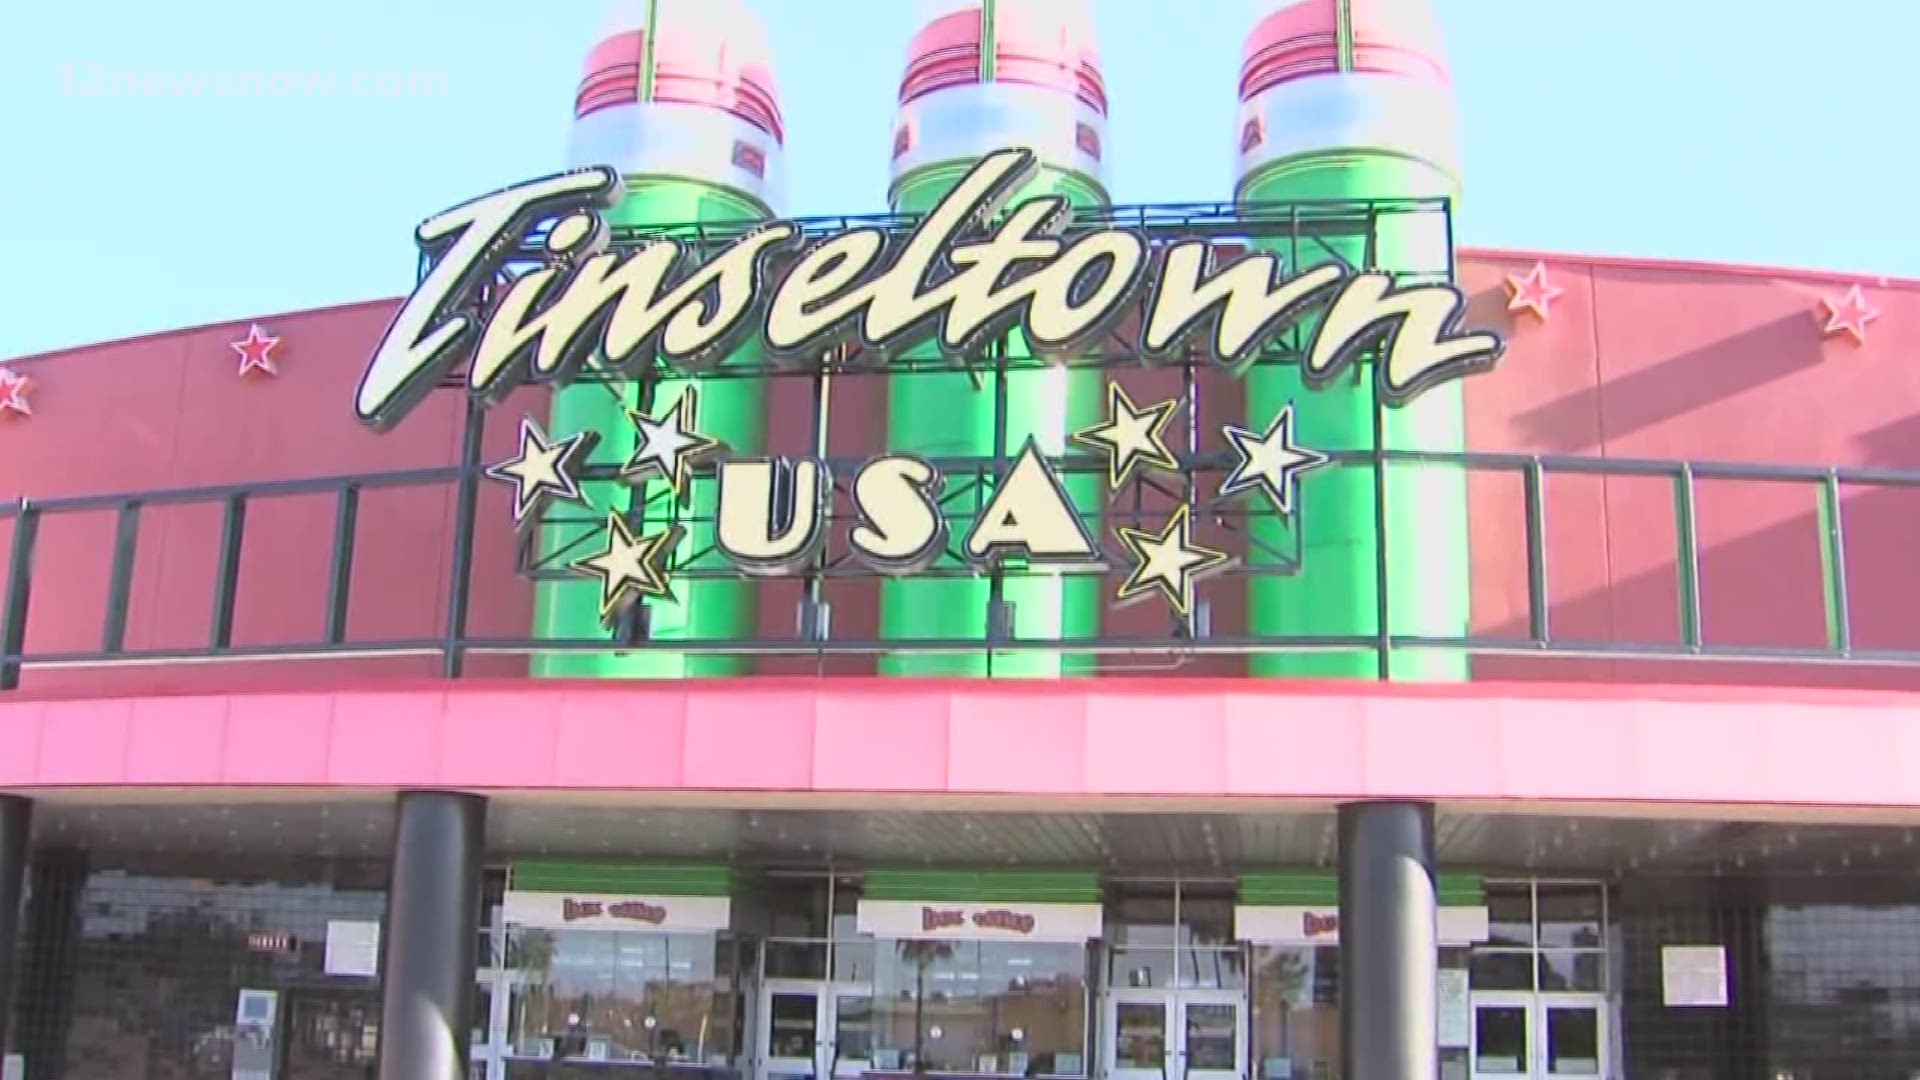 Tinseltown theater confirmed to 12News that they will not be reopening this Friday as originally planned.